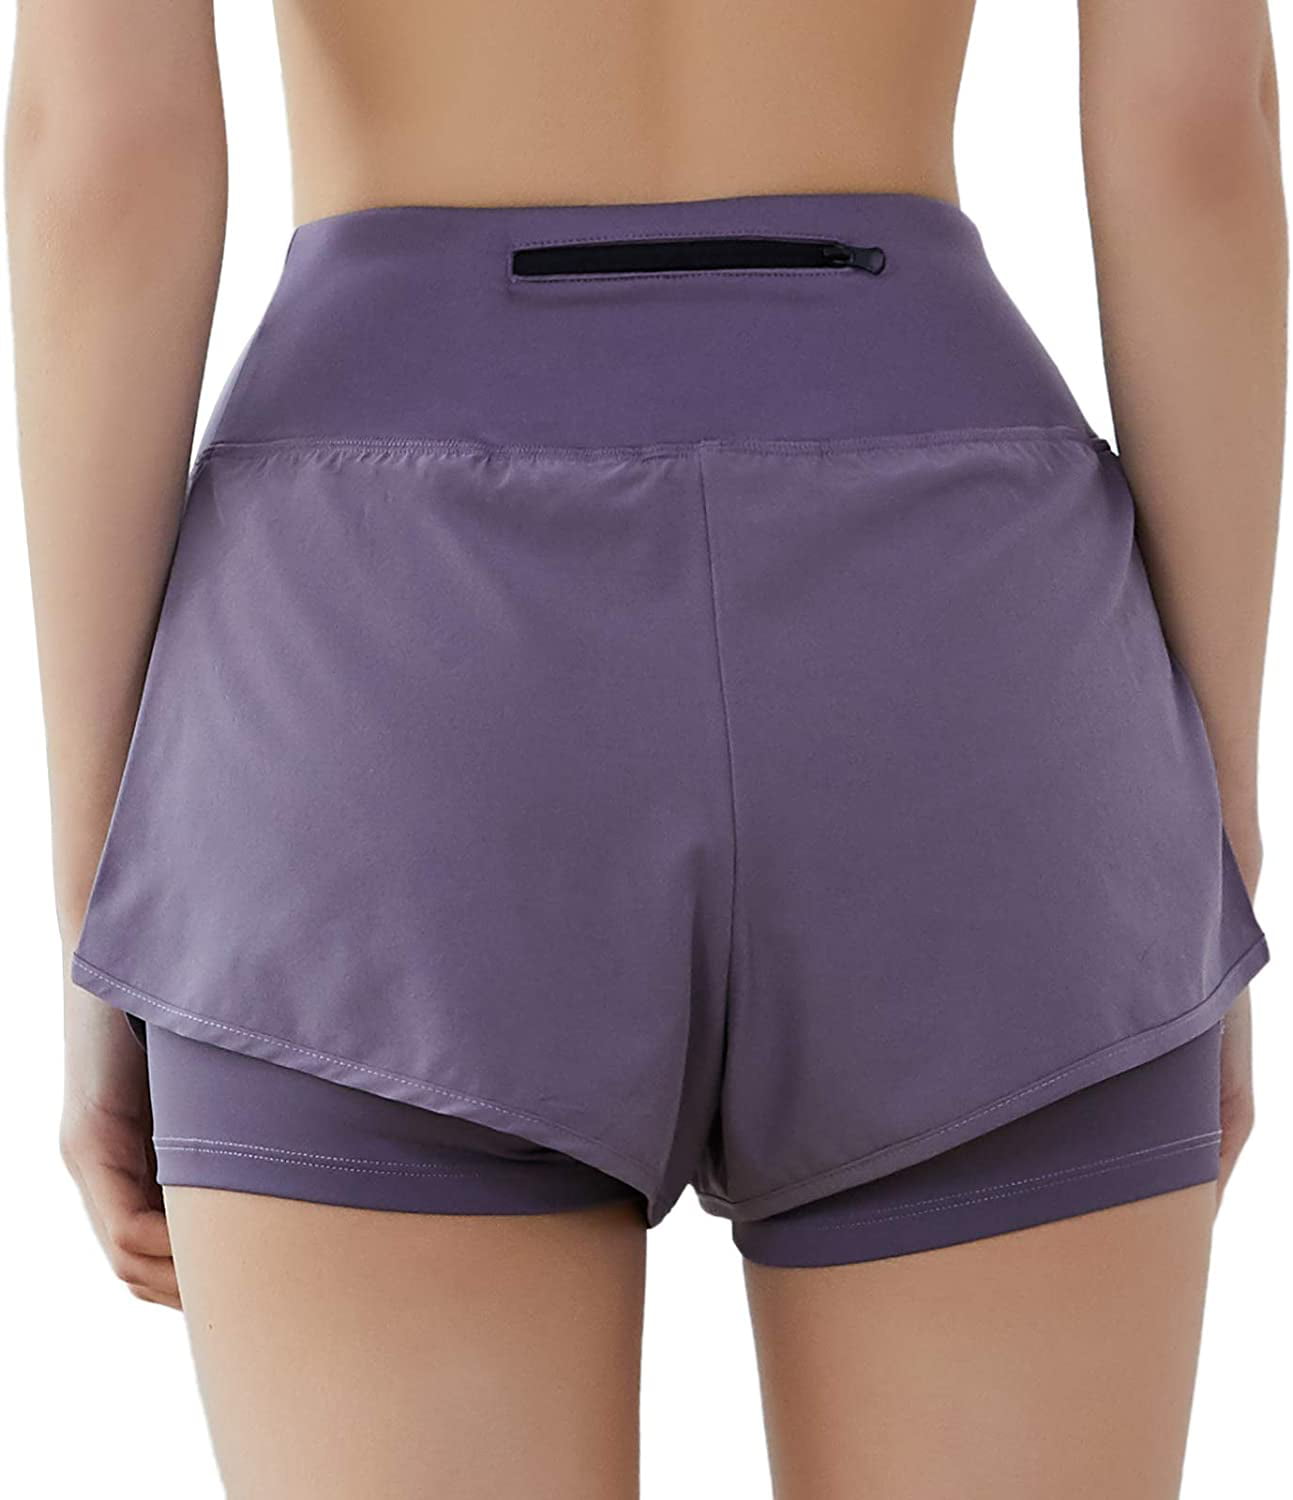 SKYSPER Running Shorts Womens 2 in 1 Gym Sport Shorts with Pockets Breathable Quick Dry Yoga Workout Jogging Pants for Ladies Girls